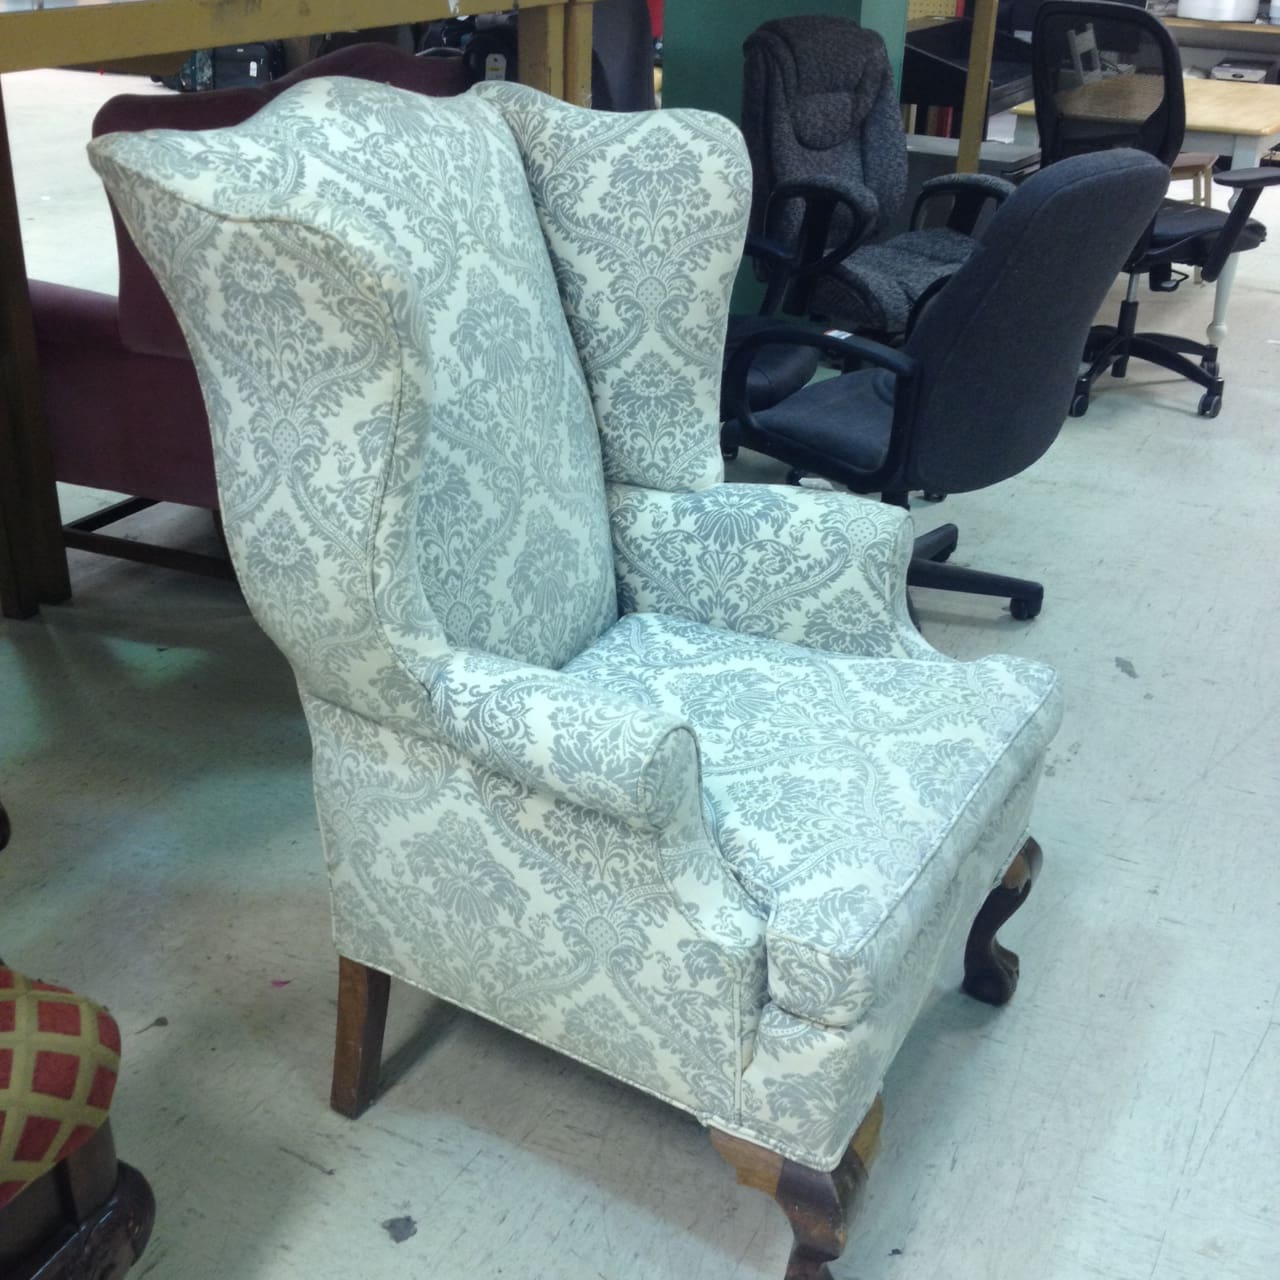 How To Reupholster A Wingback Chair, How Much Does It Cost To Recover A Wingback Chair Uk